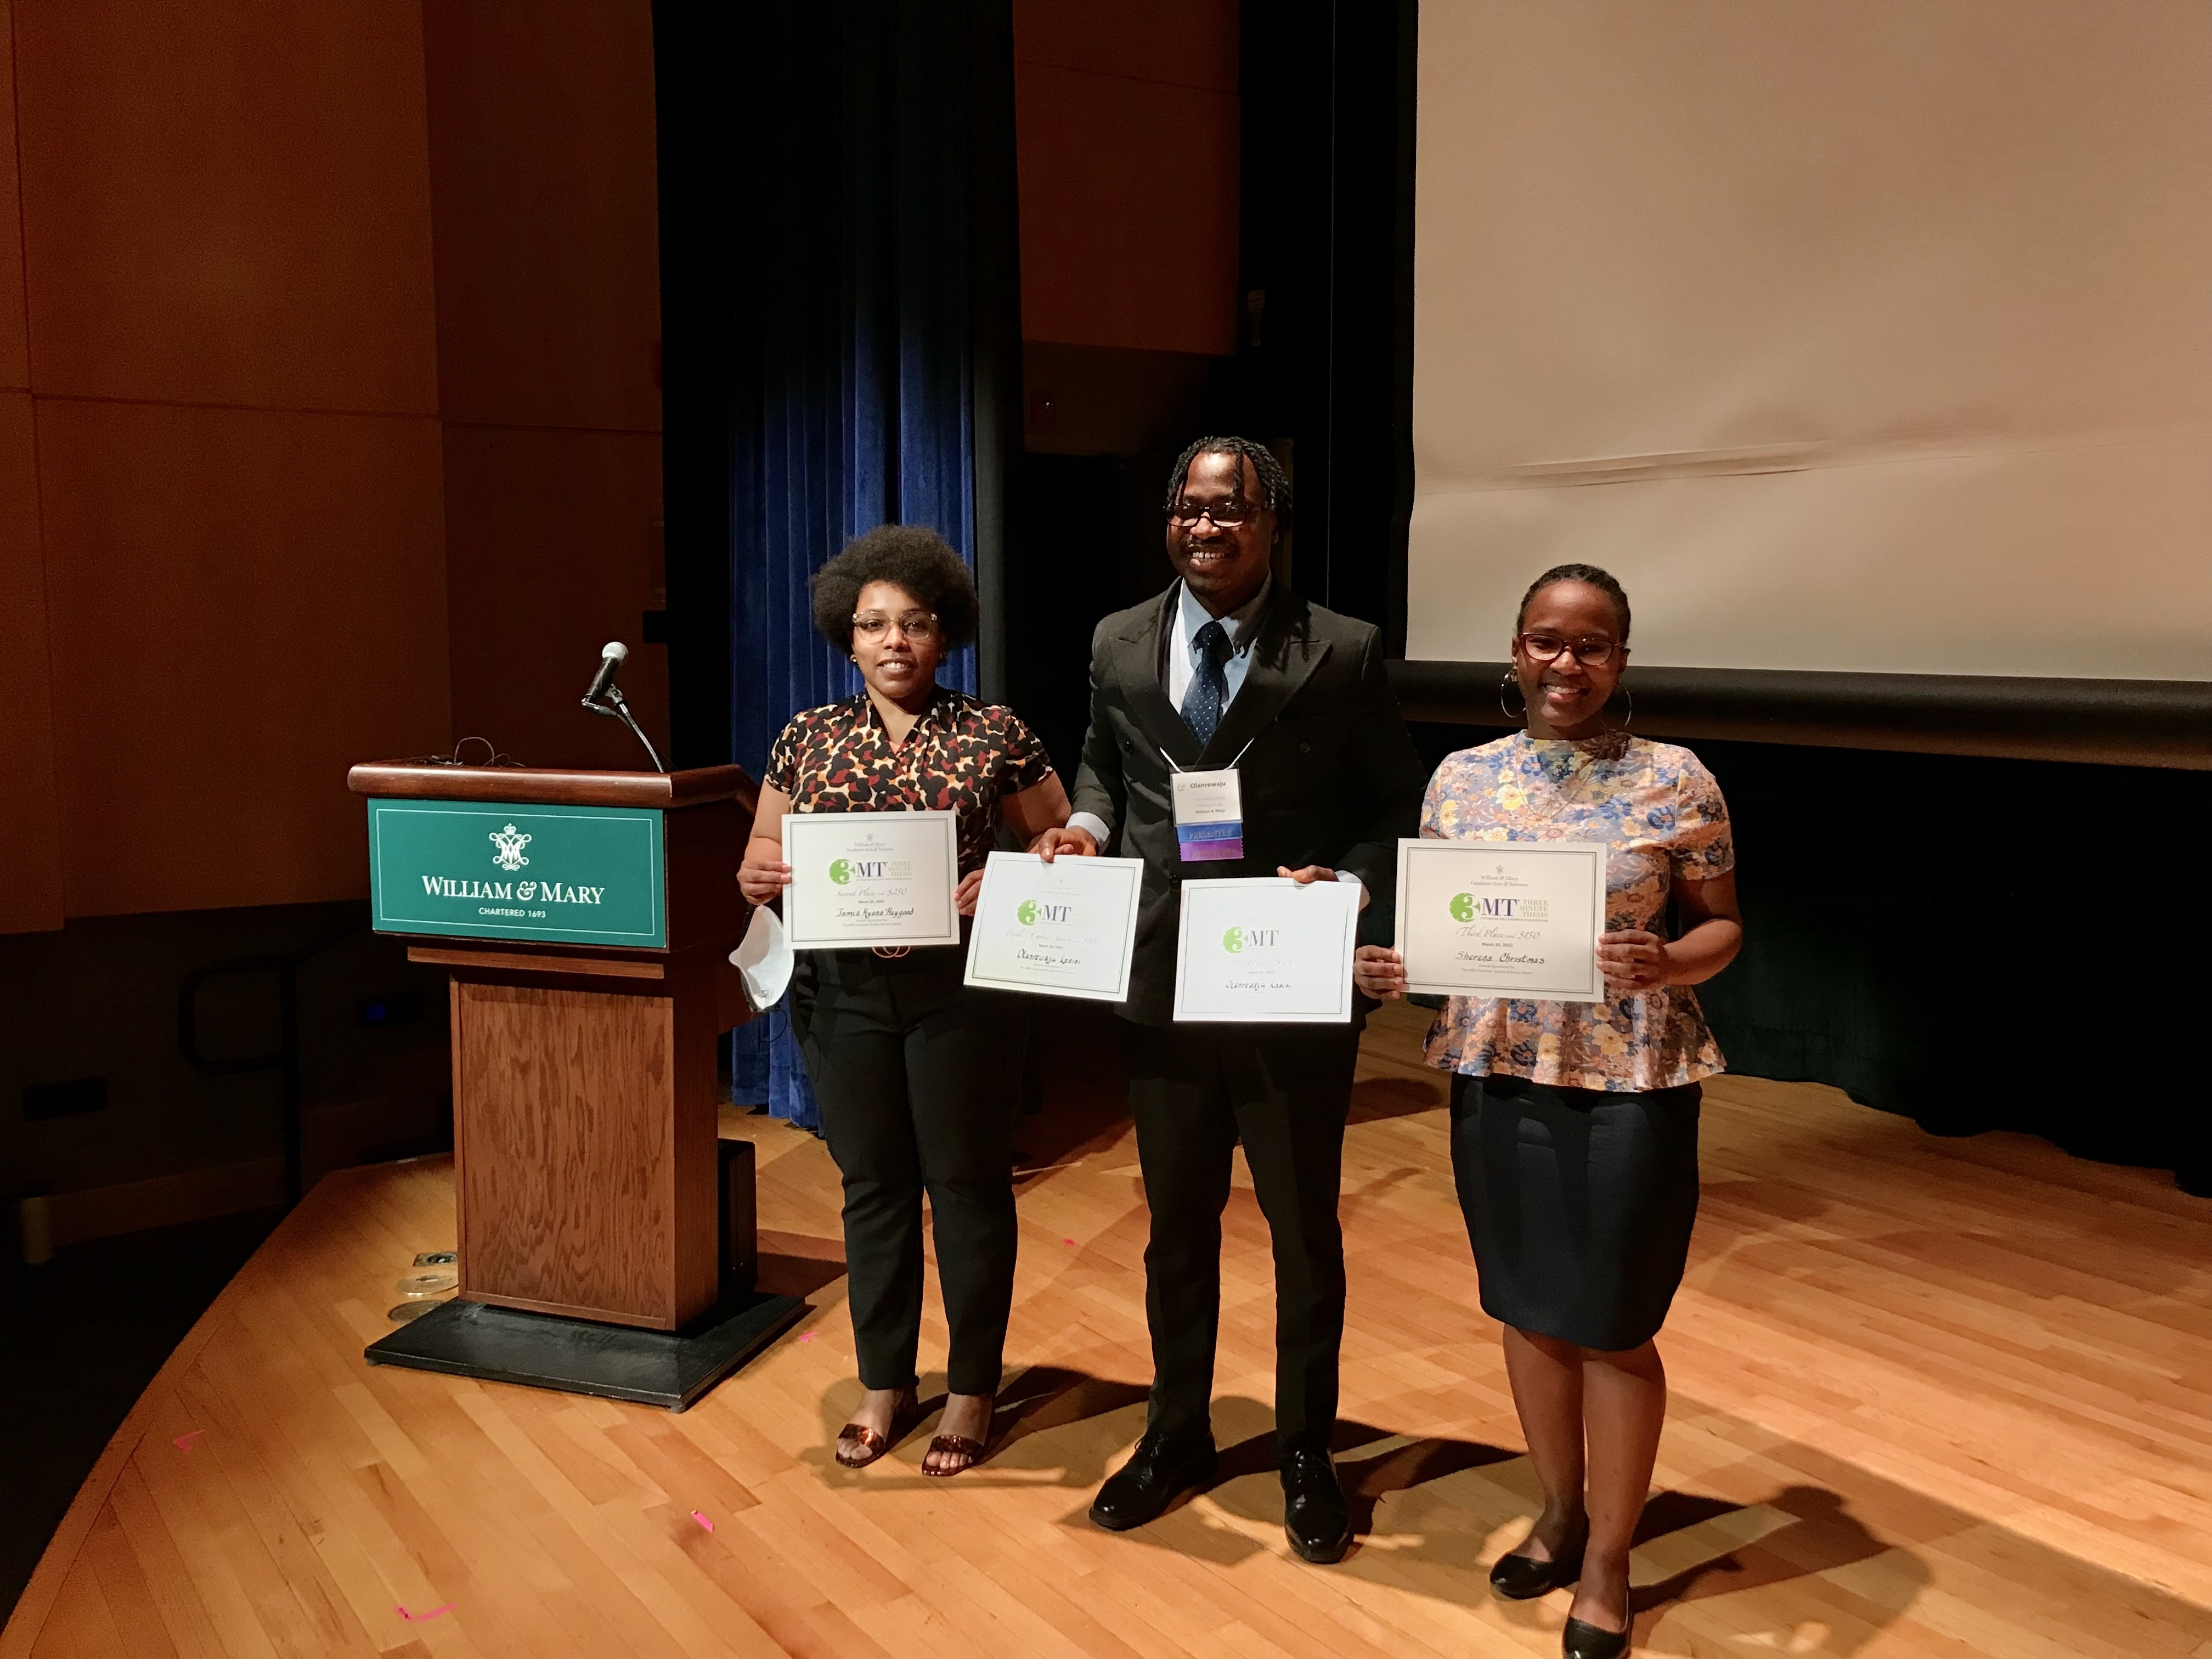 Pictured: 3MT award winners, left to right, Tamia Haygood, History doctoral candidate; Olanrewaju Lasisi, Anthropology doctoral candidate; Sherena Christmas, Biology master’s student